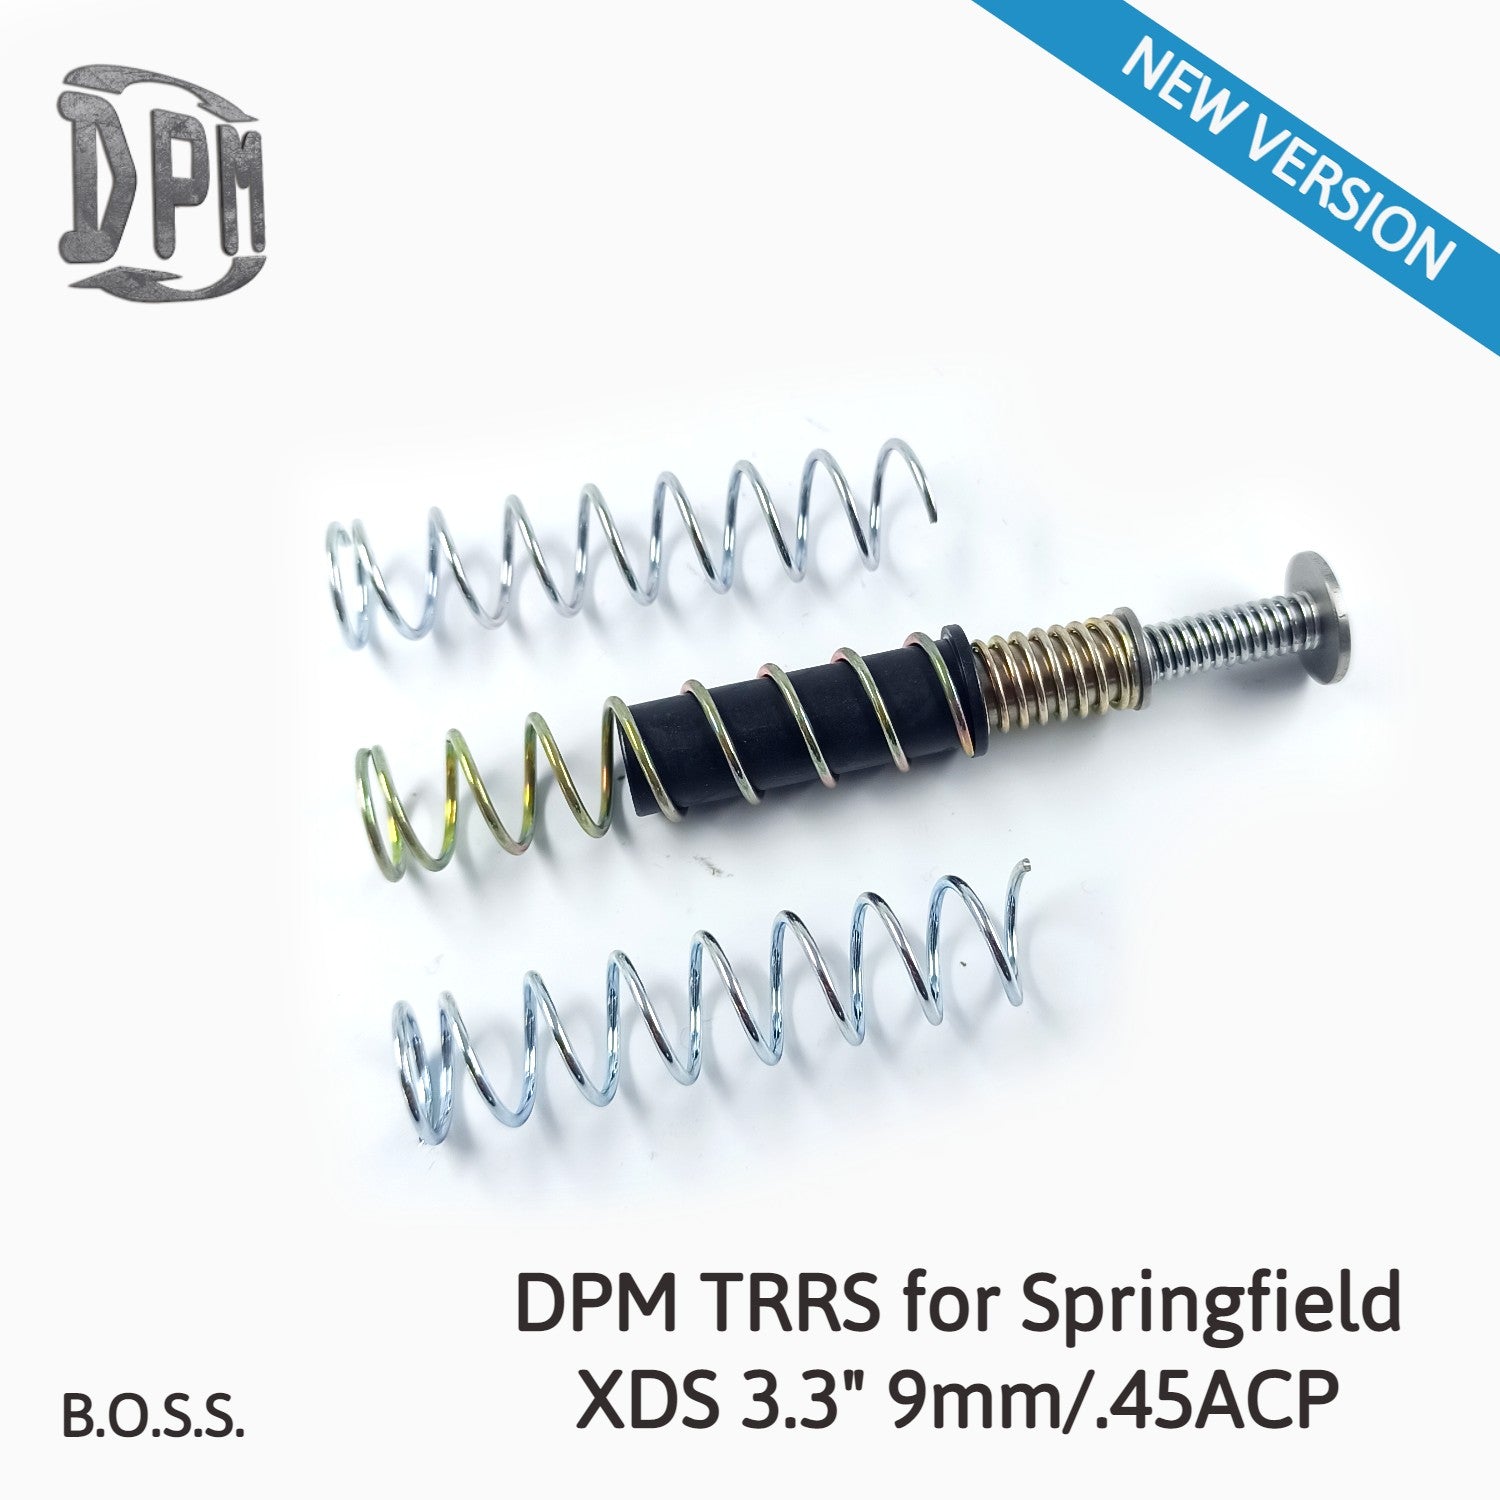 DPM TRRS for Springfield XDS 3.3″ Telescopic System 9mm/.45ACP – New Version